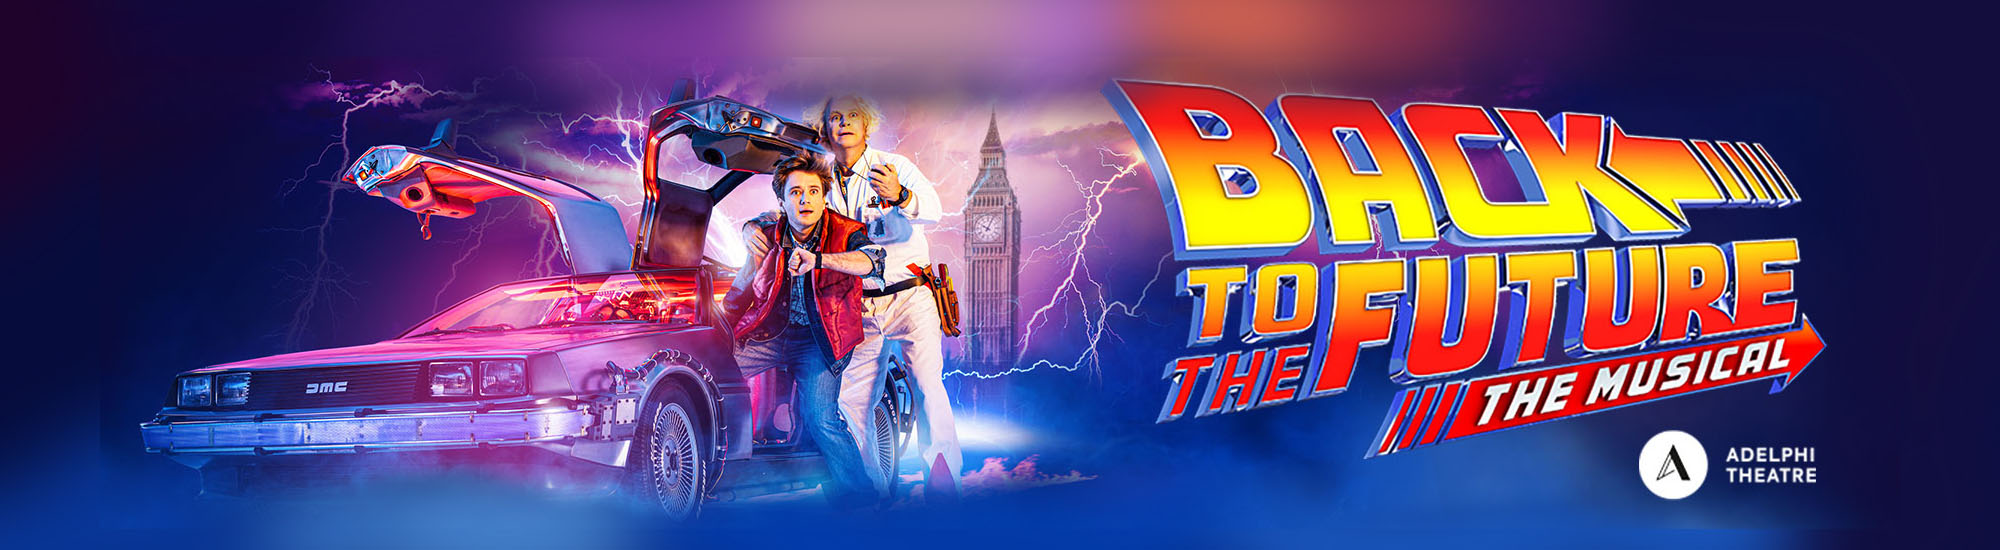 tourhub | Just Go Holidays | Back to the Future The Musical - Matinee Show 